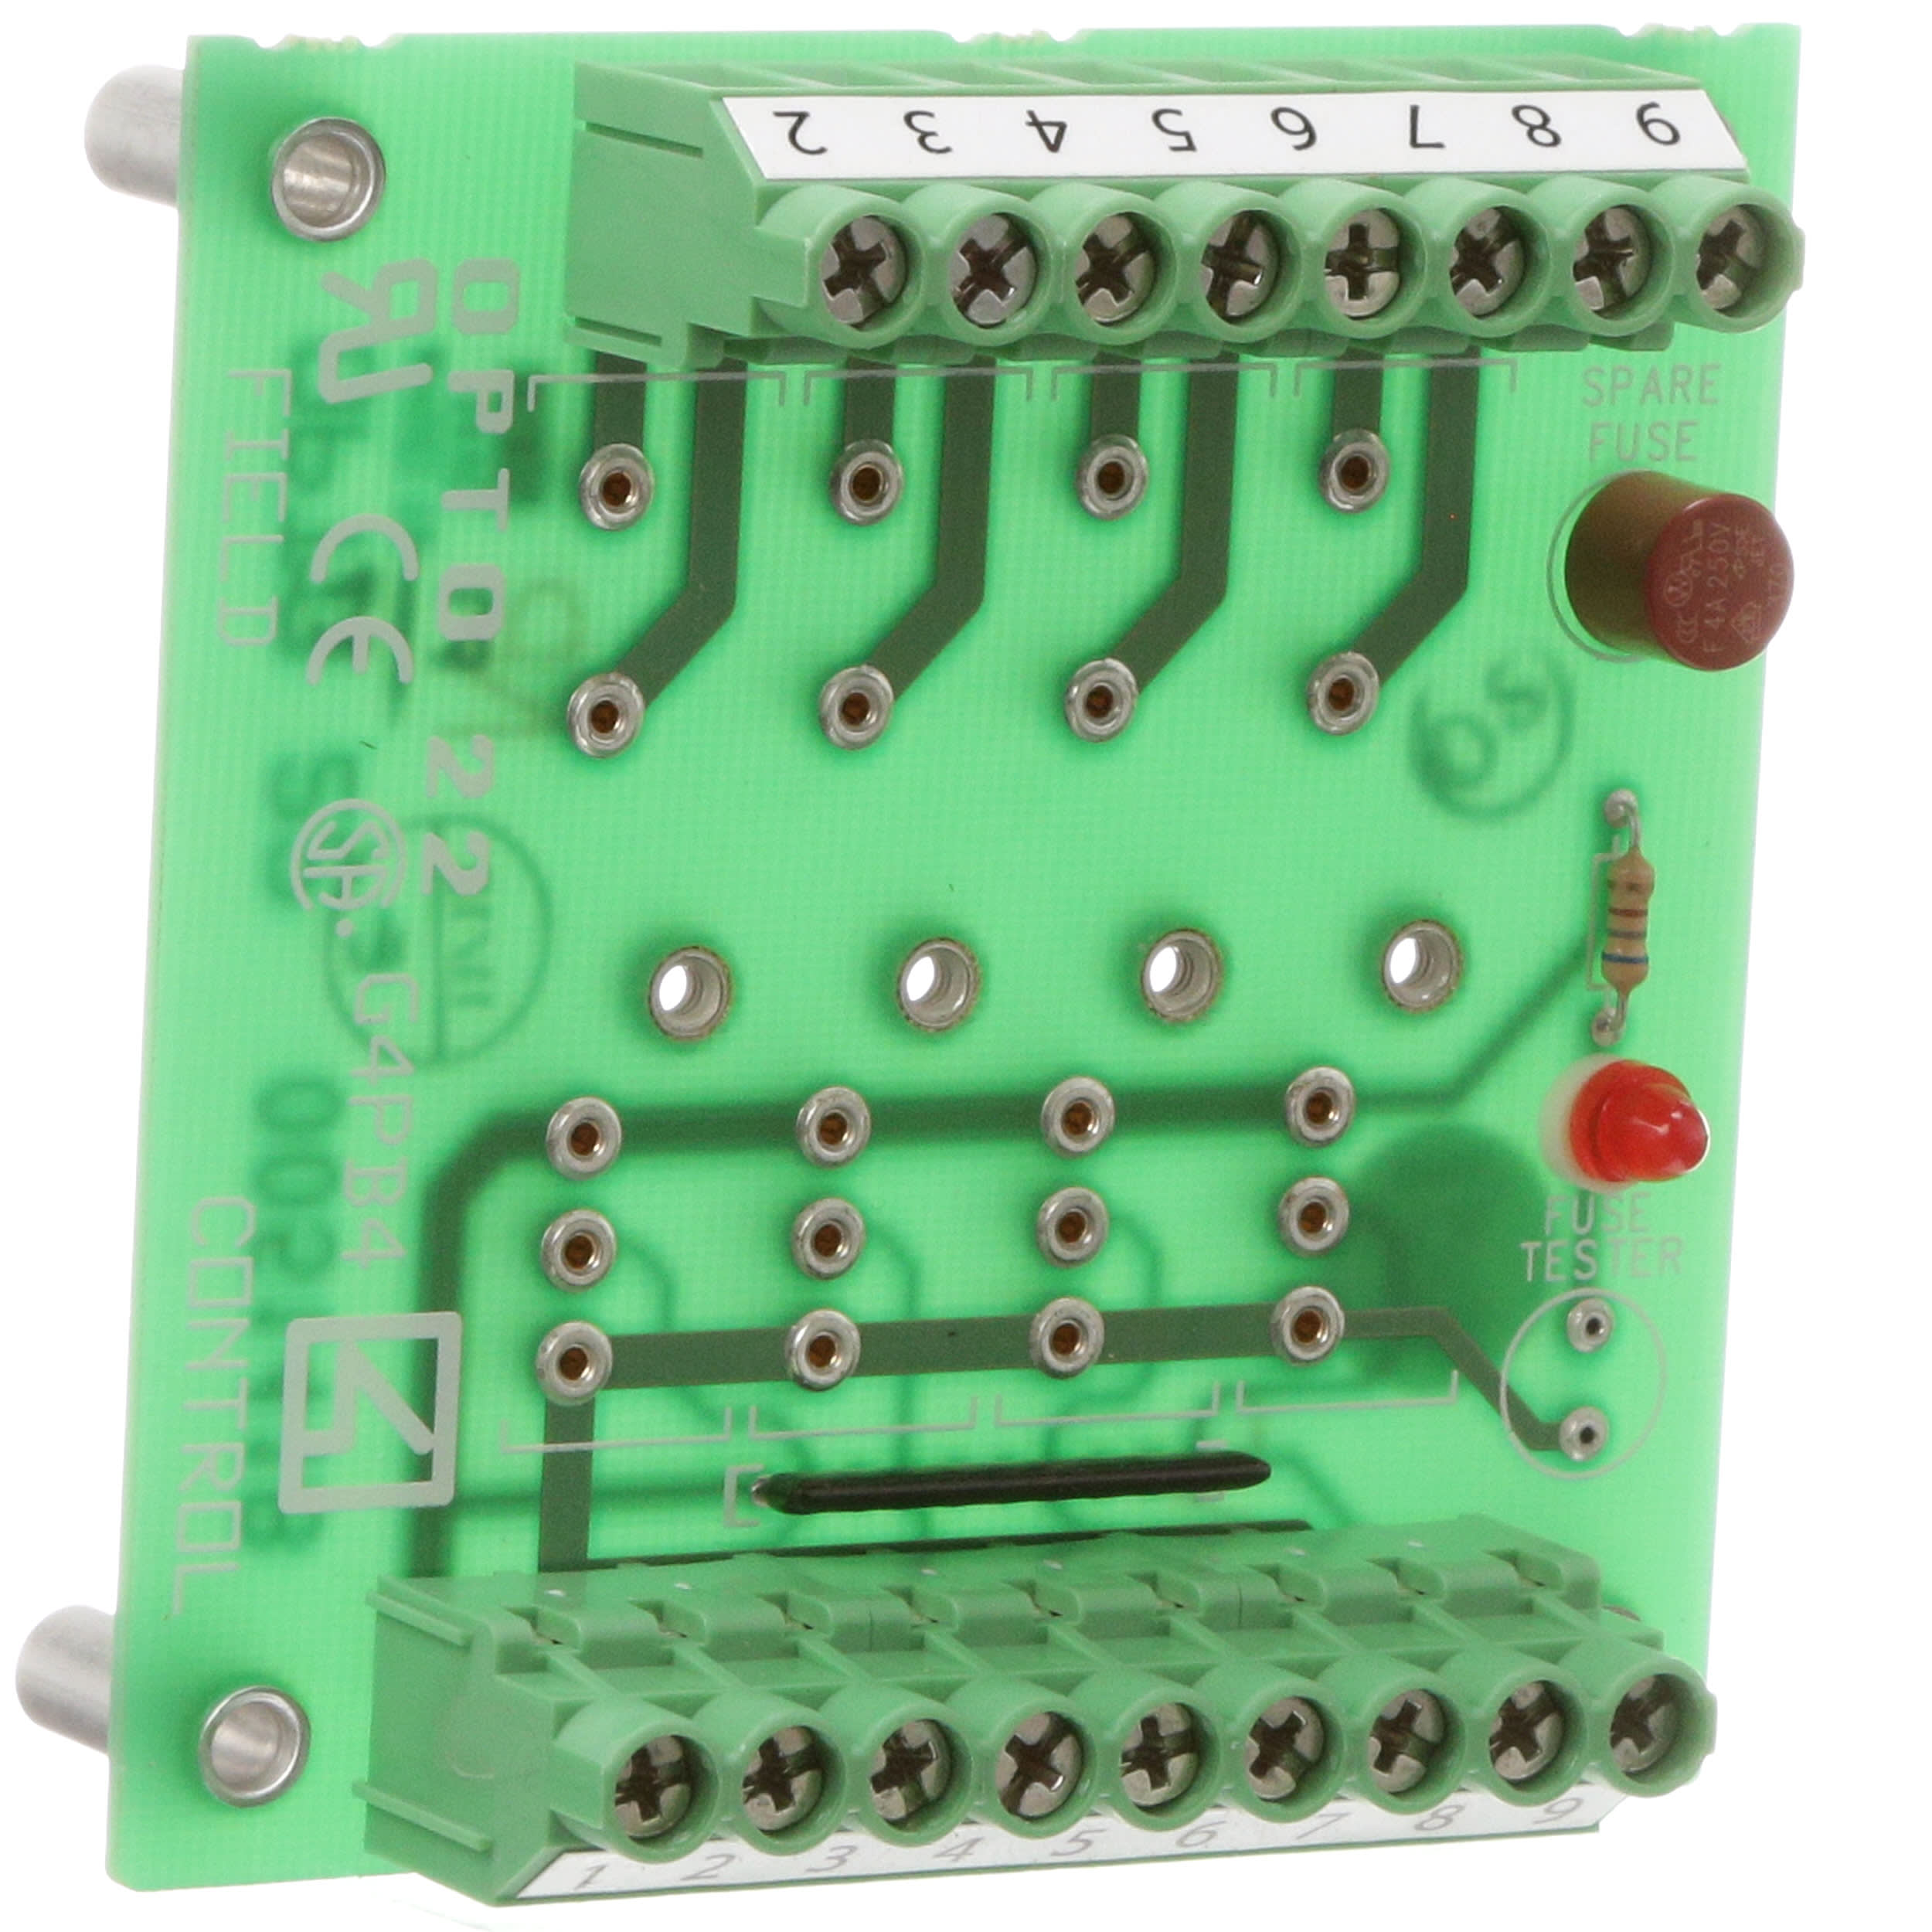 Opto22 G4-PB4 I/O Module for sale online 